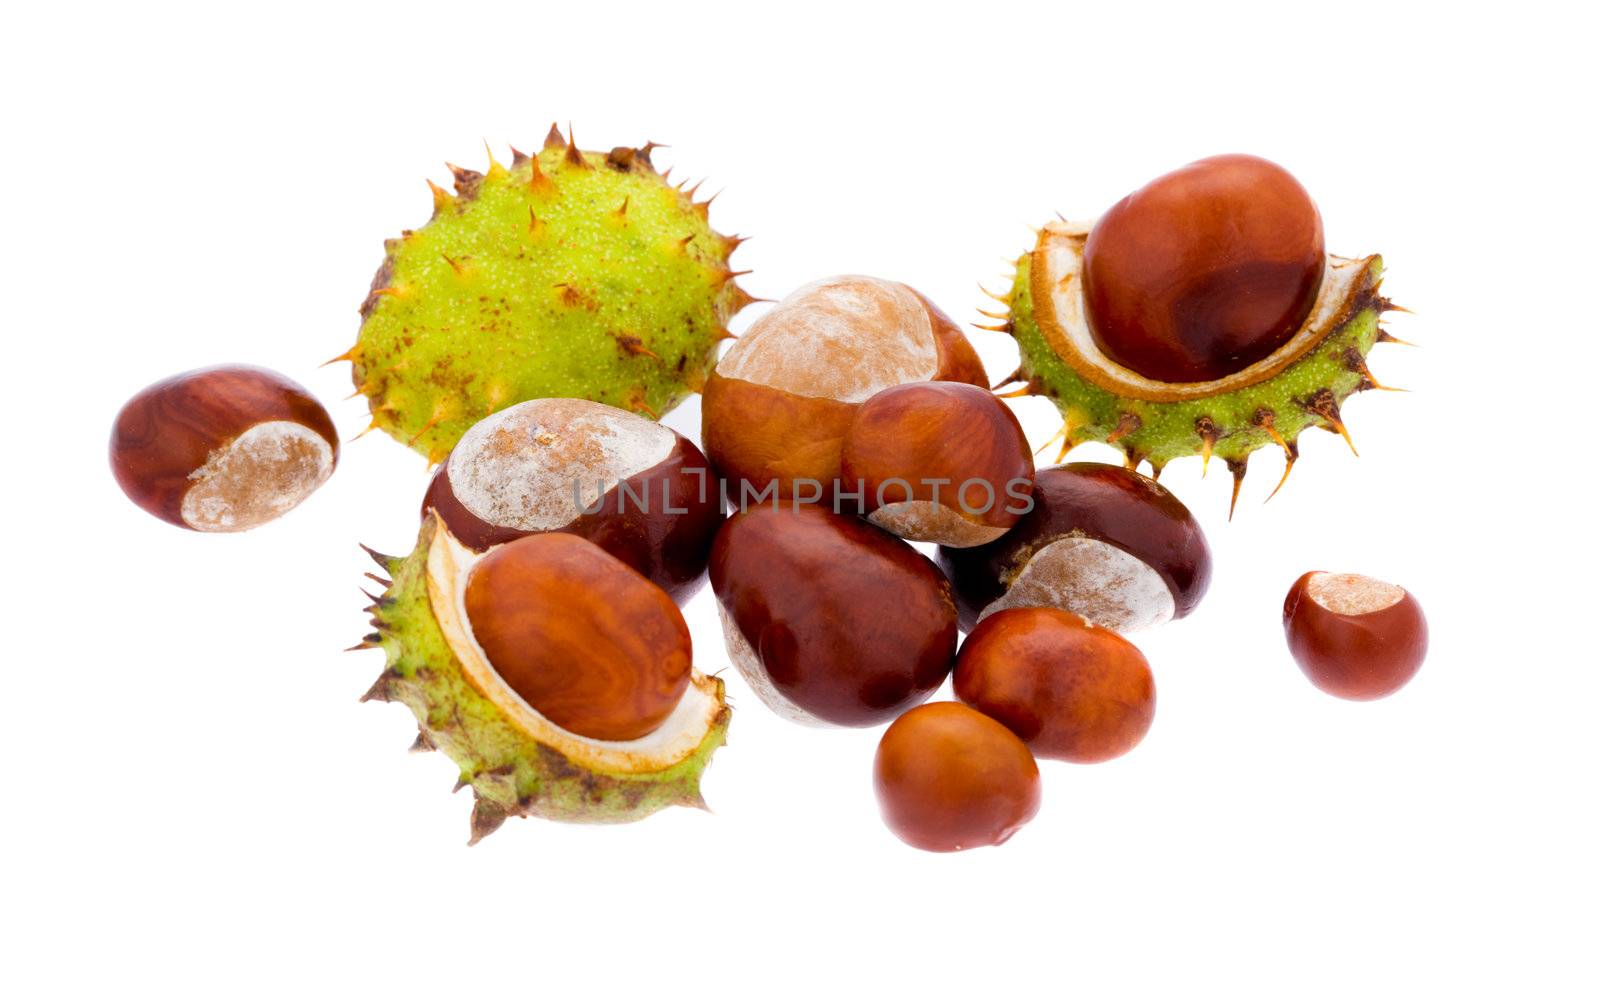 Set of chestnuts by mihhailov